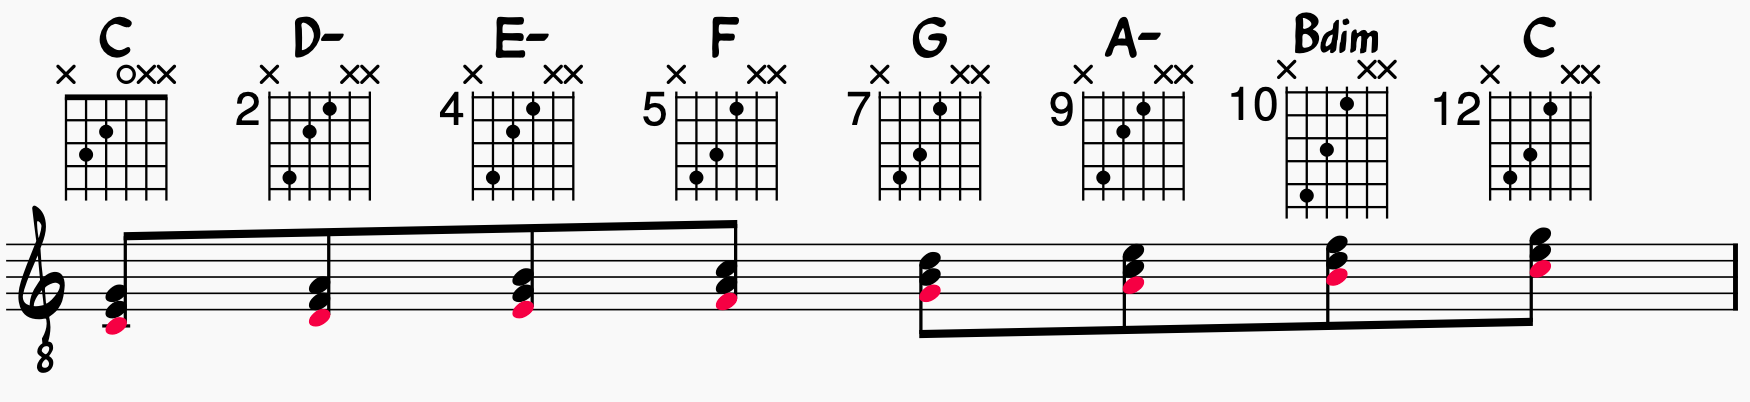 Chord Melody Basics: C major chord scale with fretboard diagrams and chord shapes sticking to one string group